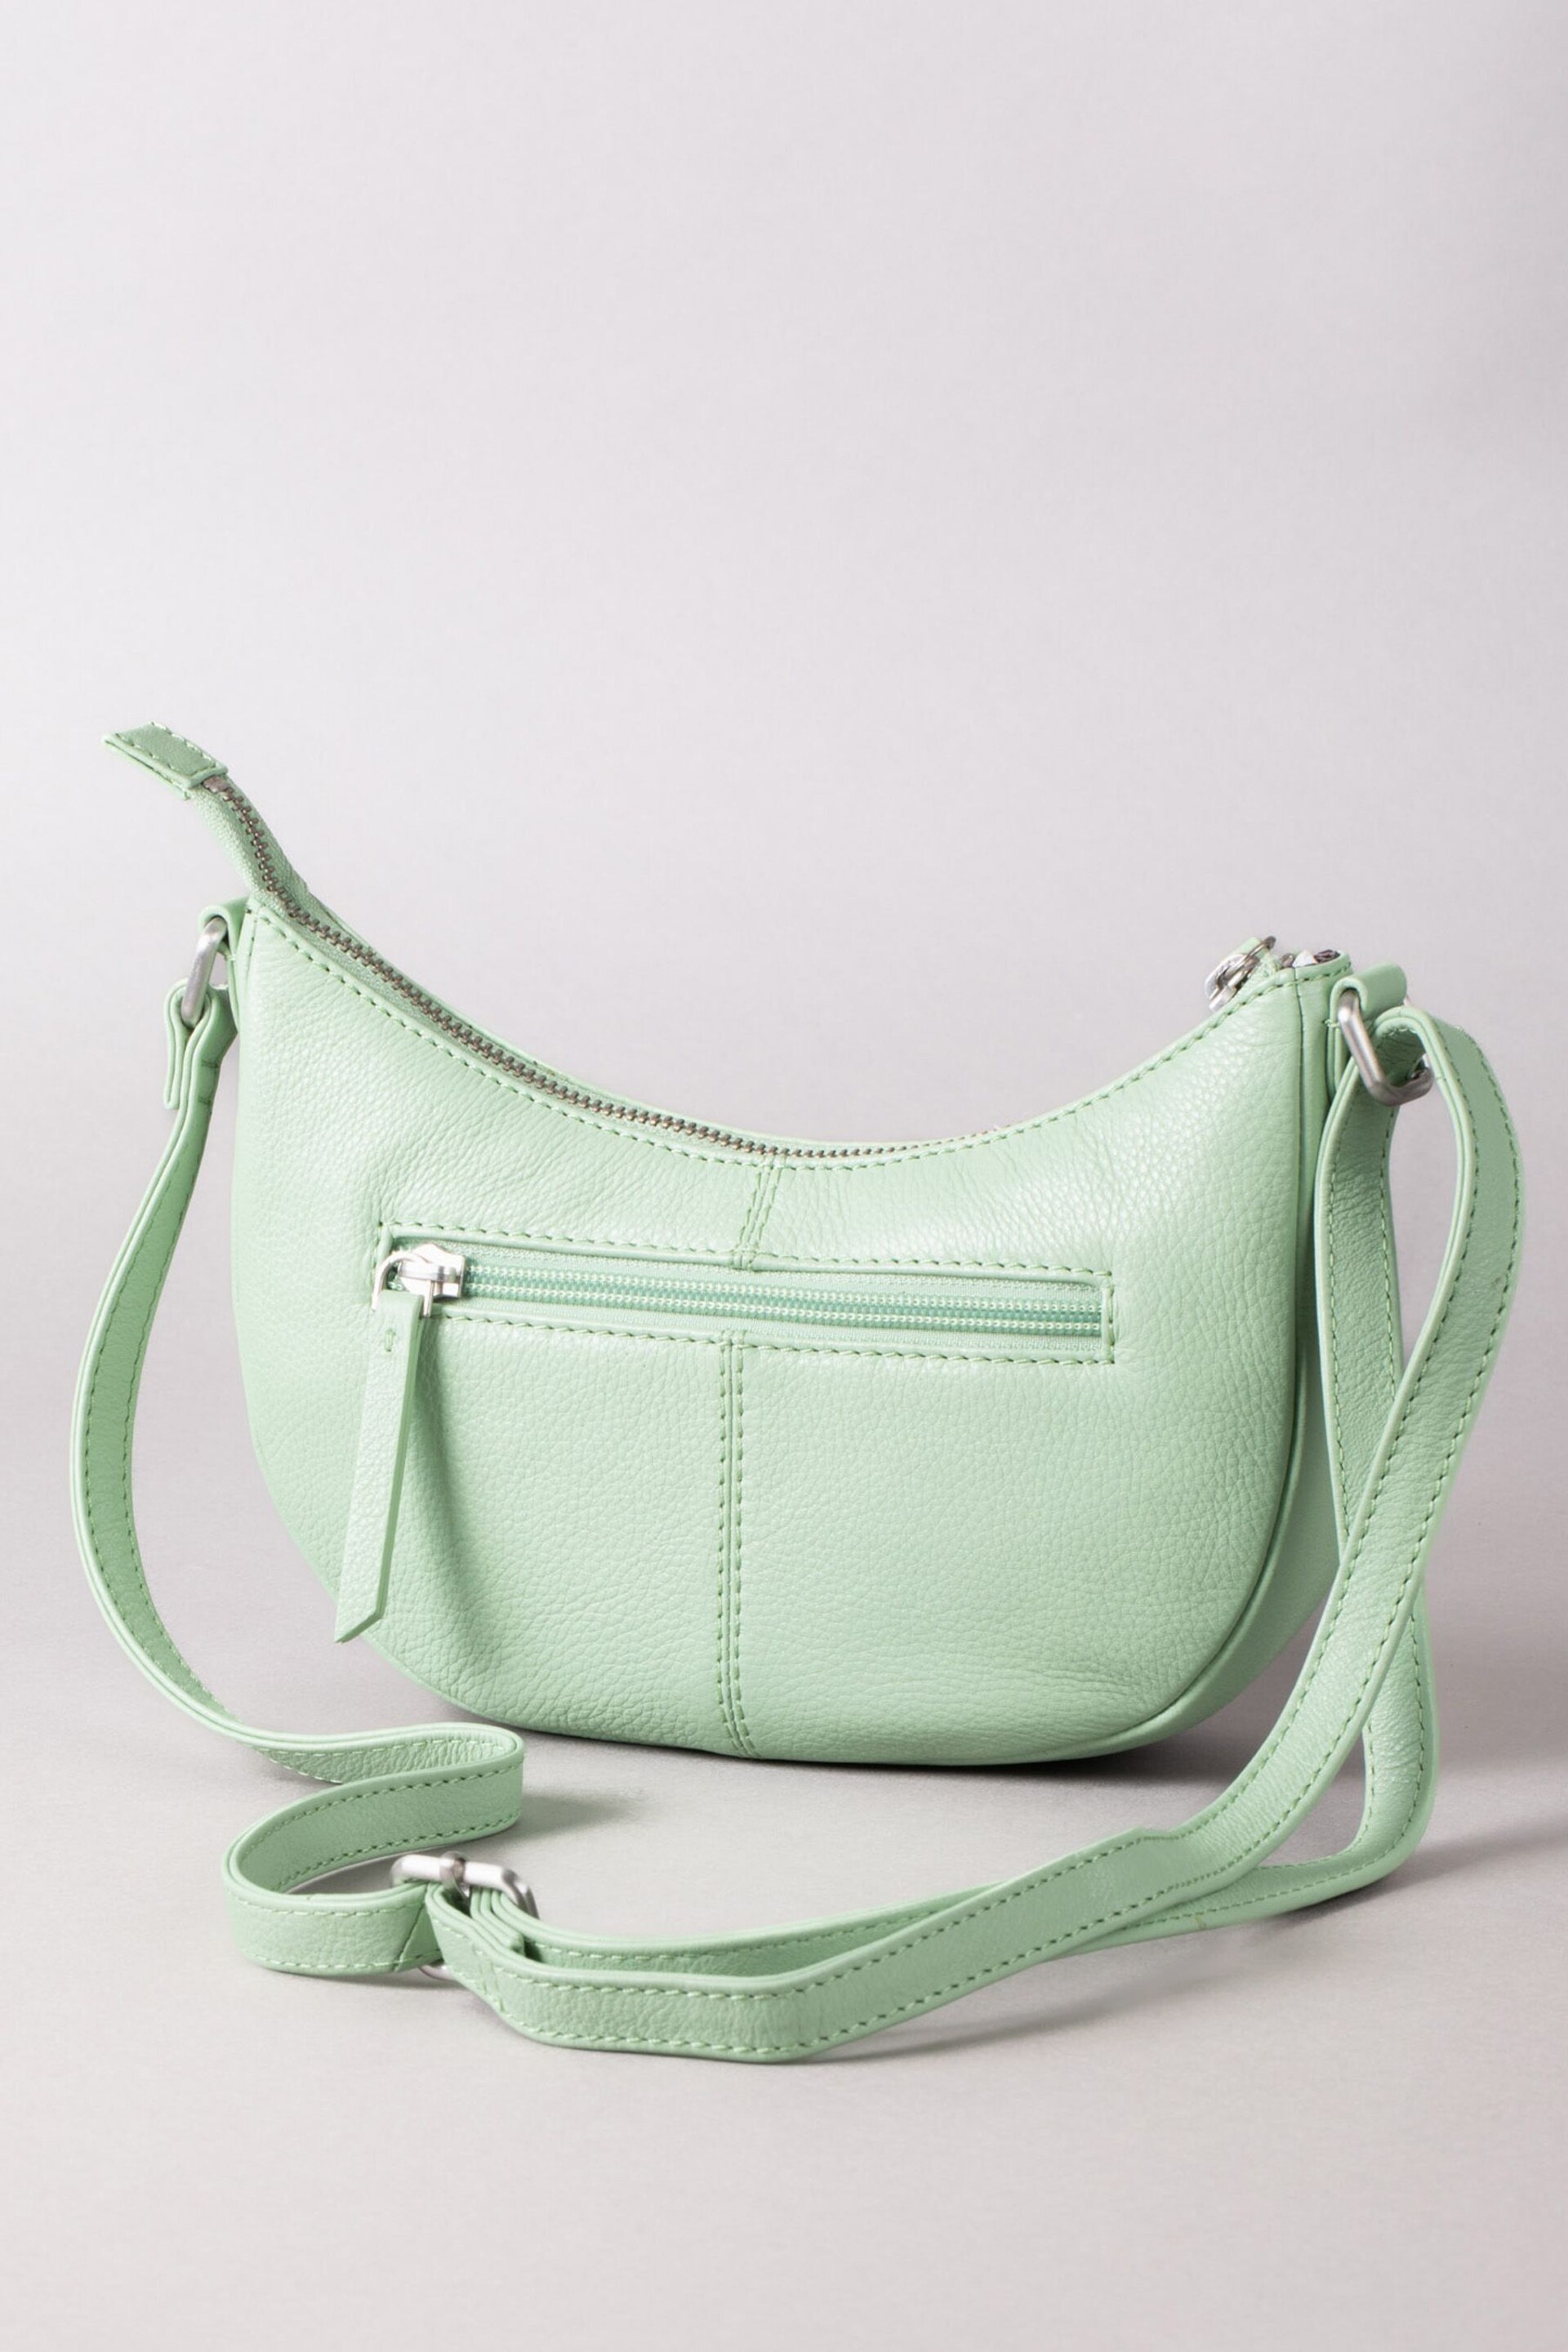 Lakeland Leather Green Coniston Crescent Cross-Body Bag - Image 5 of 6